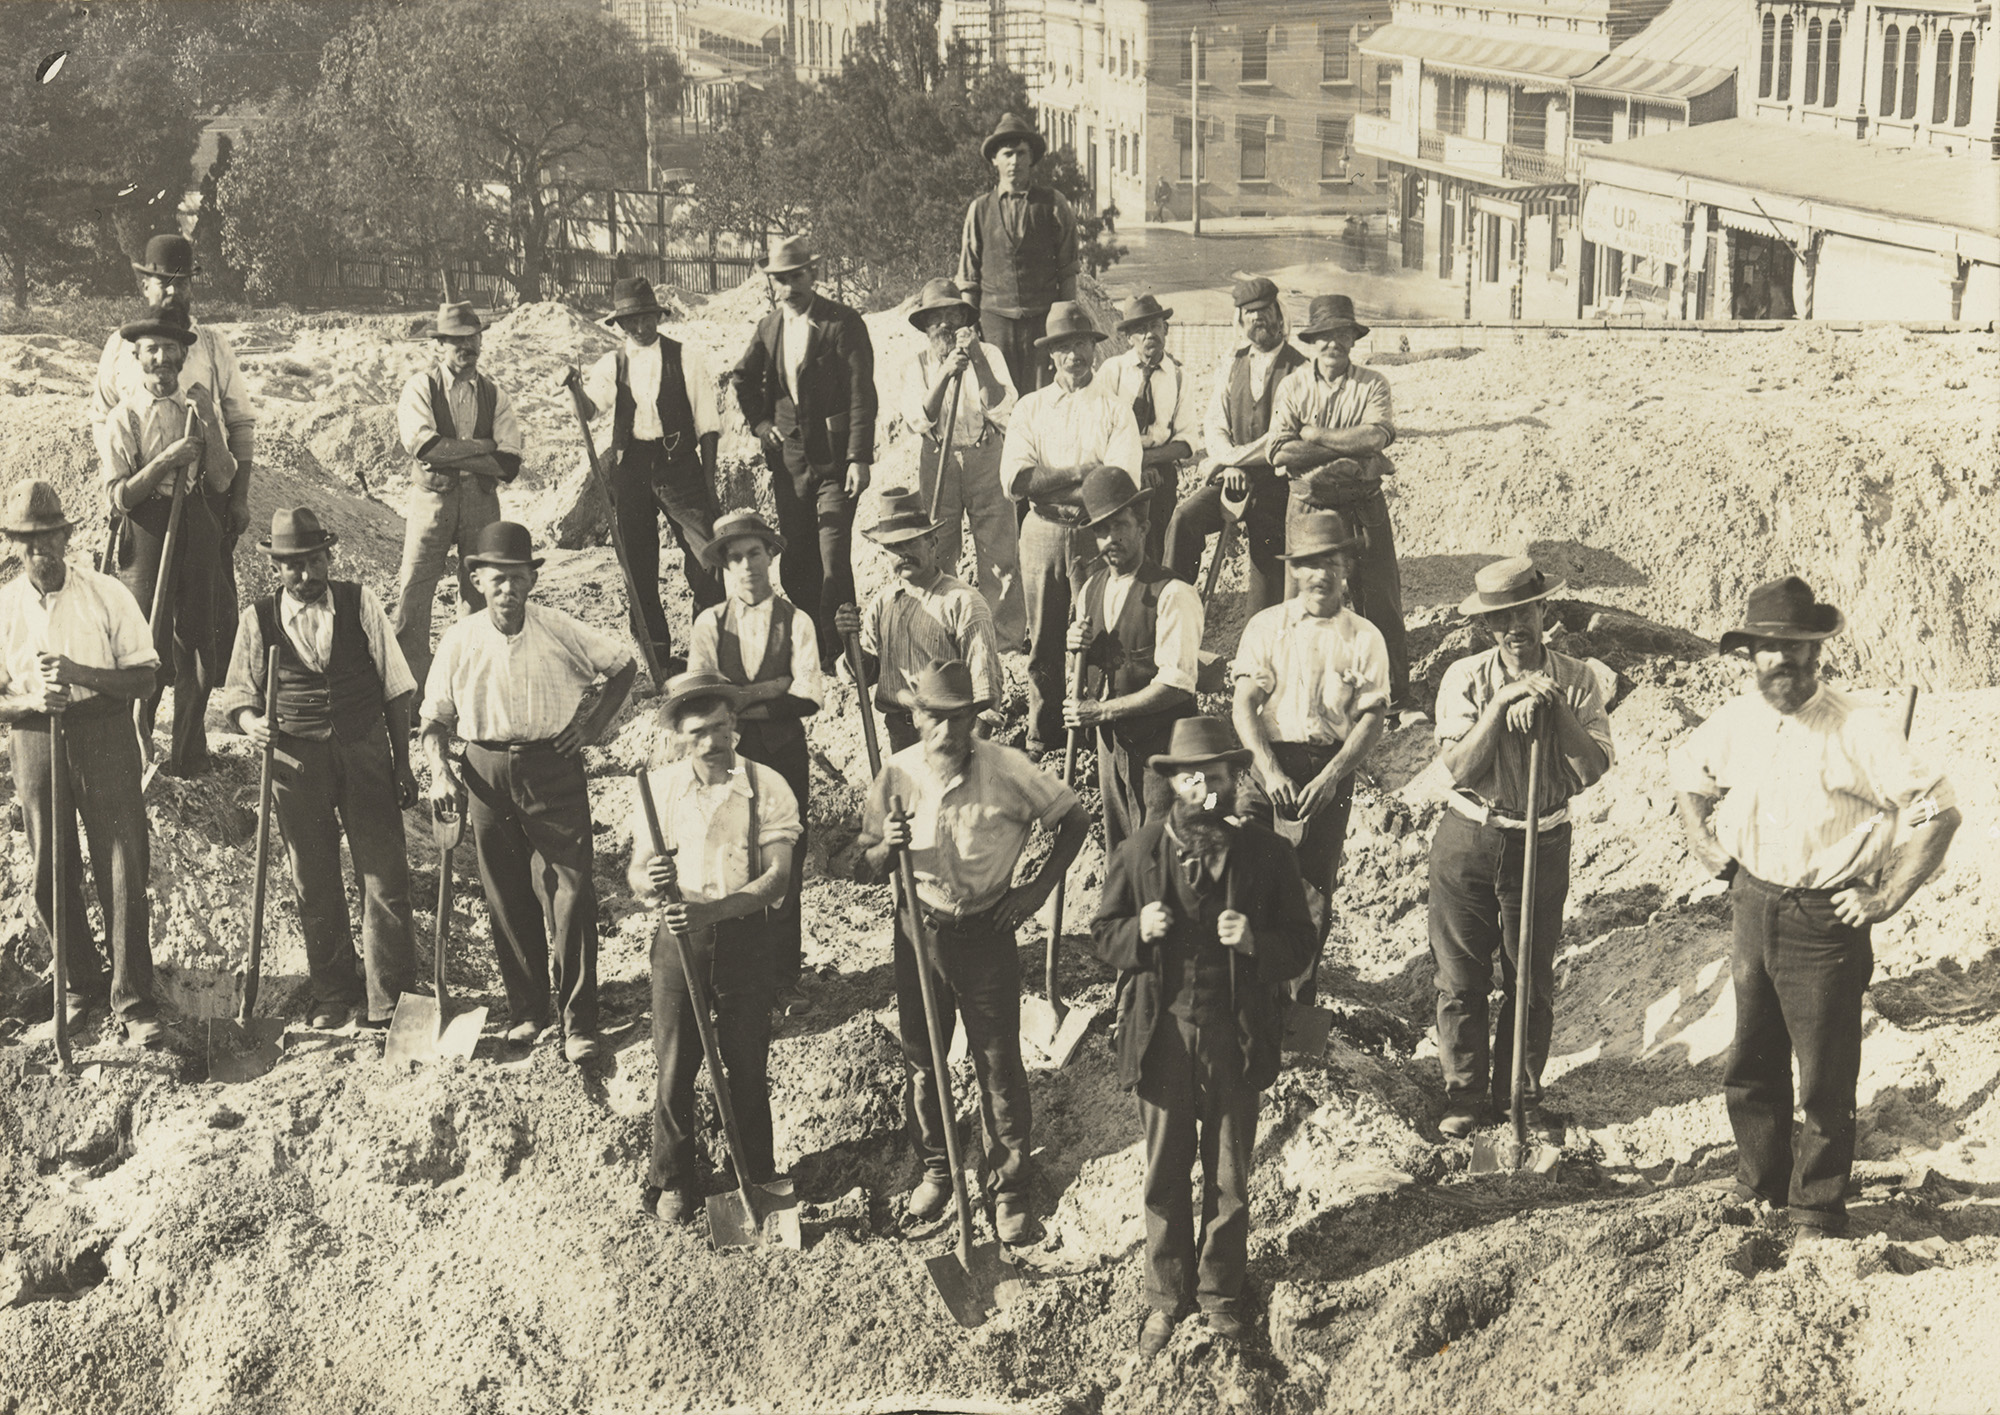 A sepia photograph of a group of workers, standing facing the camera, shovels in hand - they wear trousers, button up shirts and suspenders. 